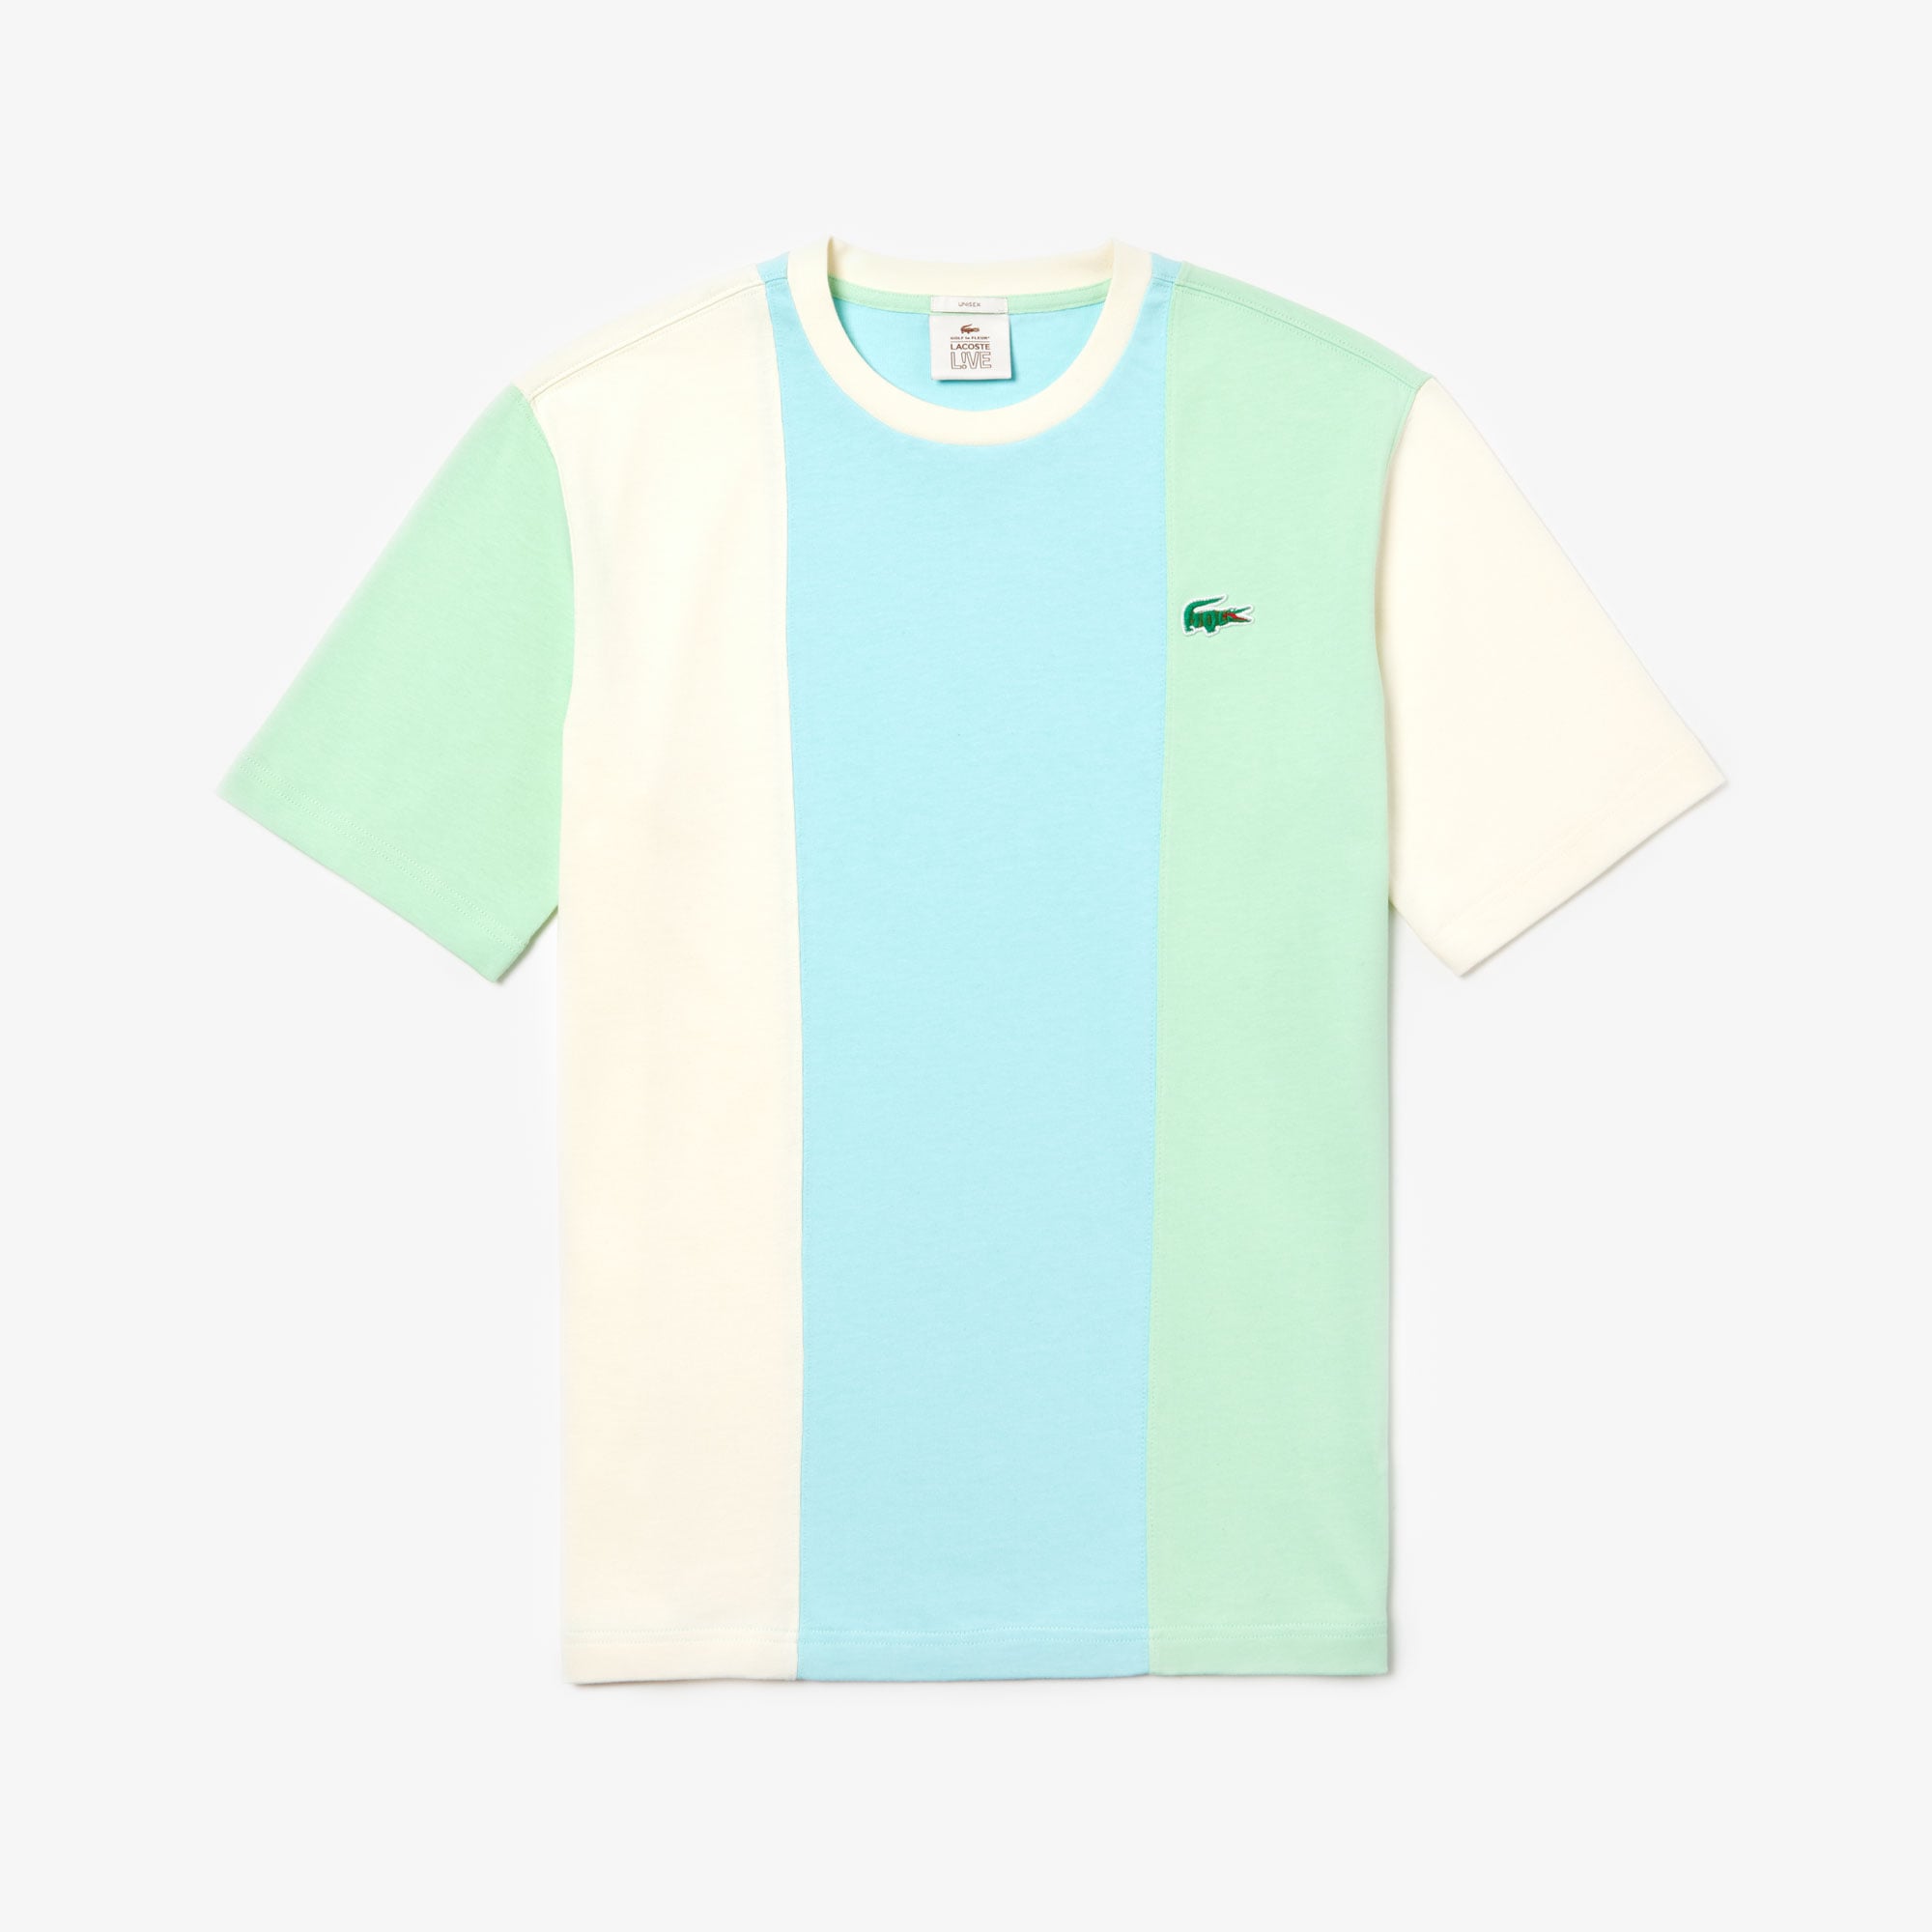 Fashion, Shopping & Style | Wow! Lacoste's Unisex Collab With Tyler the Creator Will You Back to the '80s | POPSUGAR Fashion Photo 21